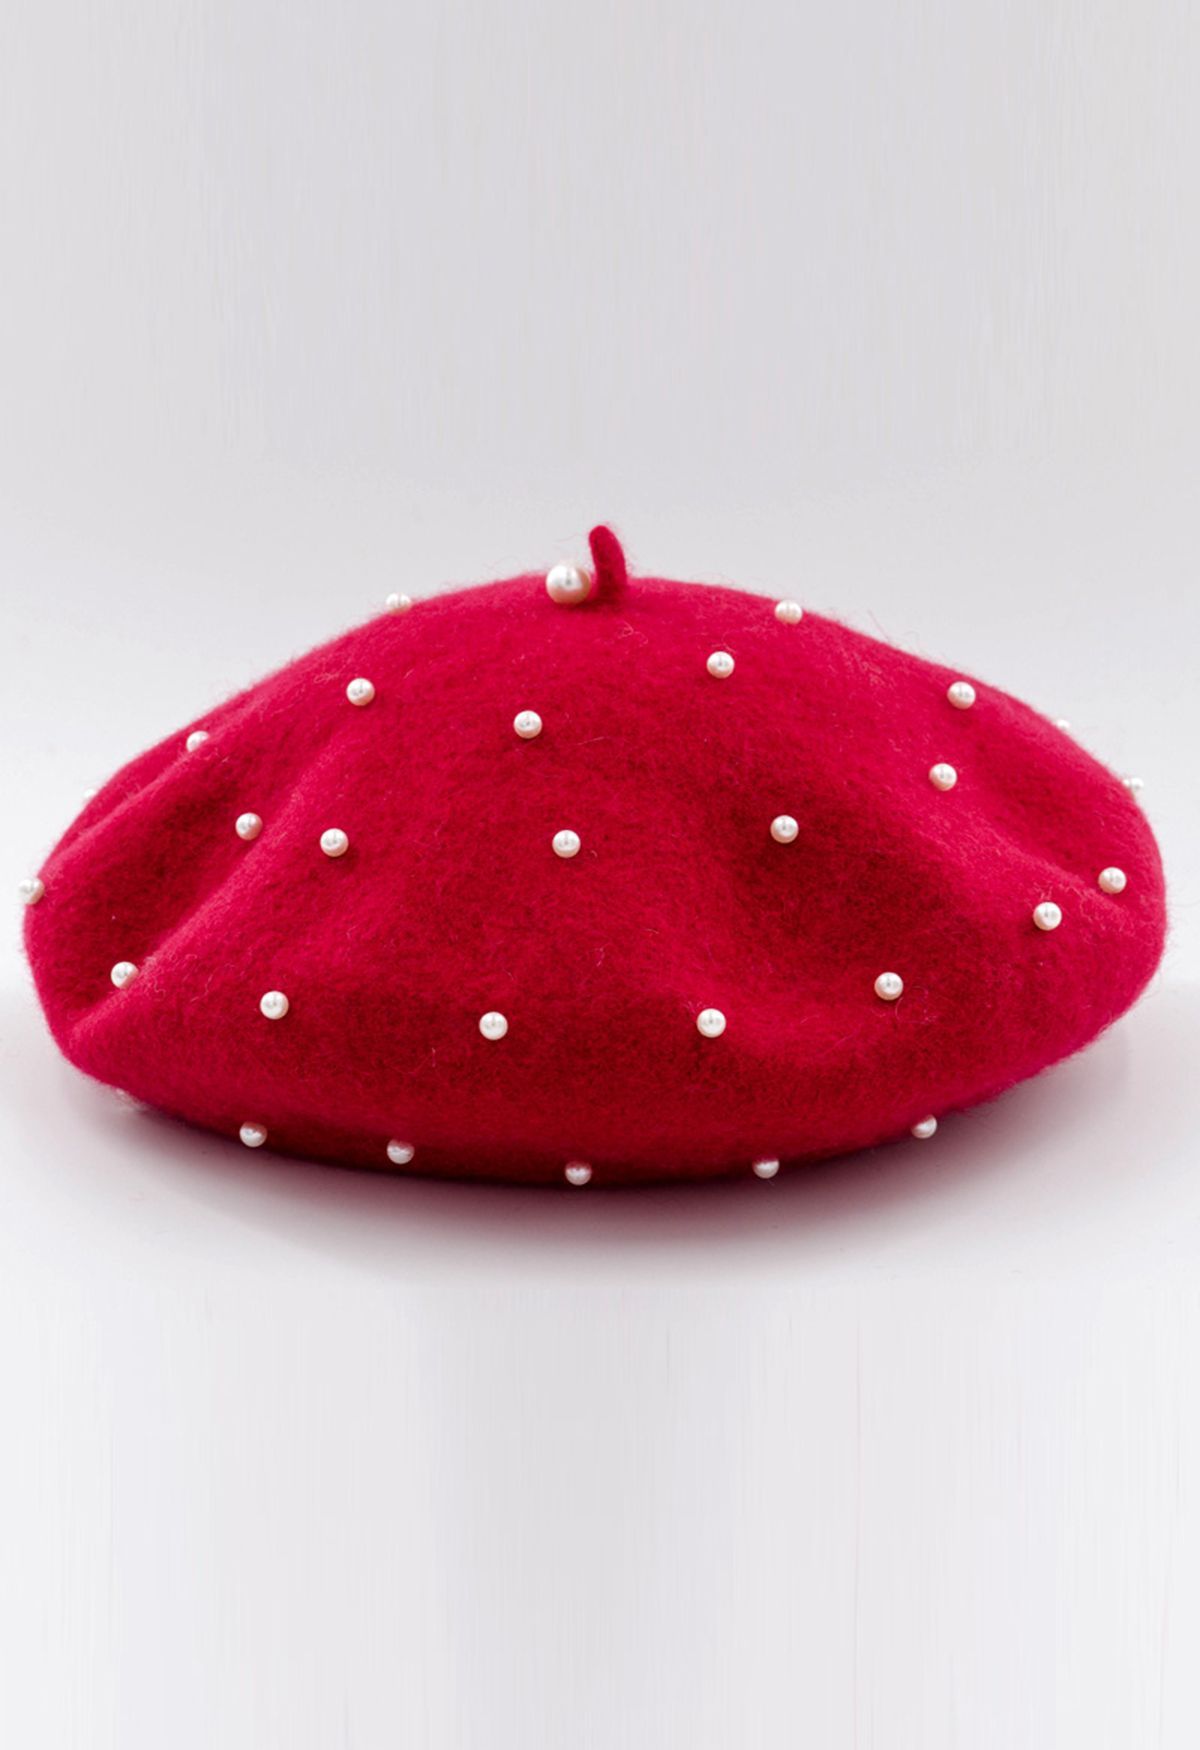 Handmade Pearl Wool Blend Beret Hat in Red | Chicwish